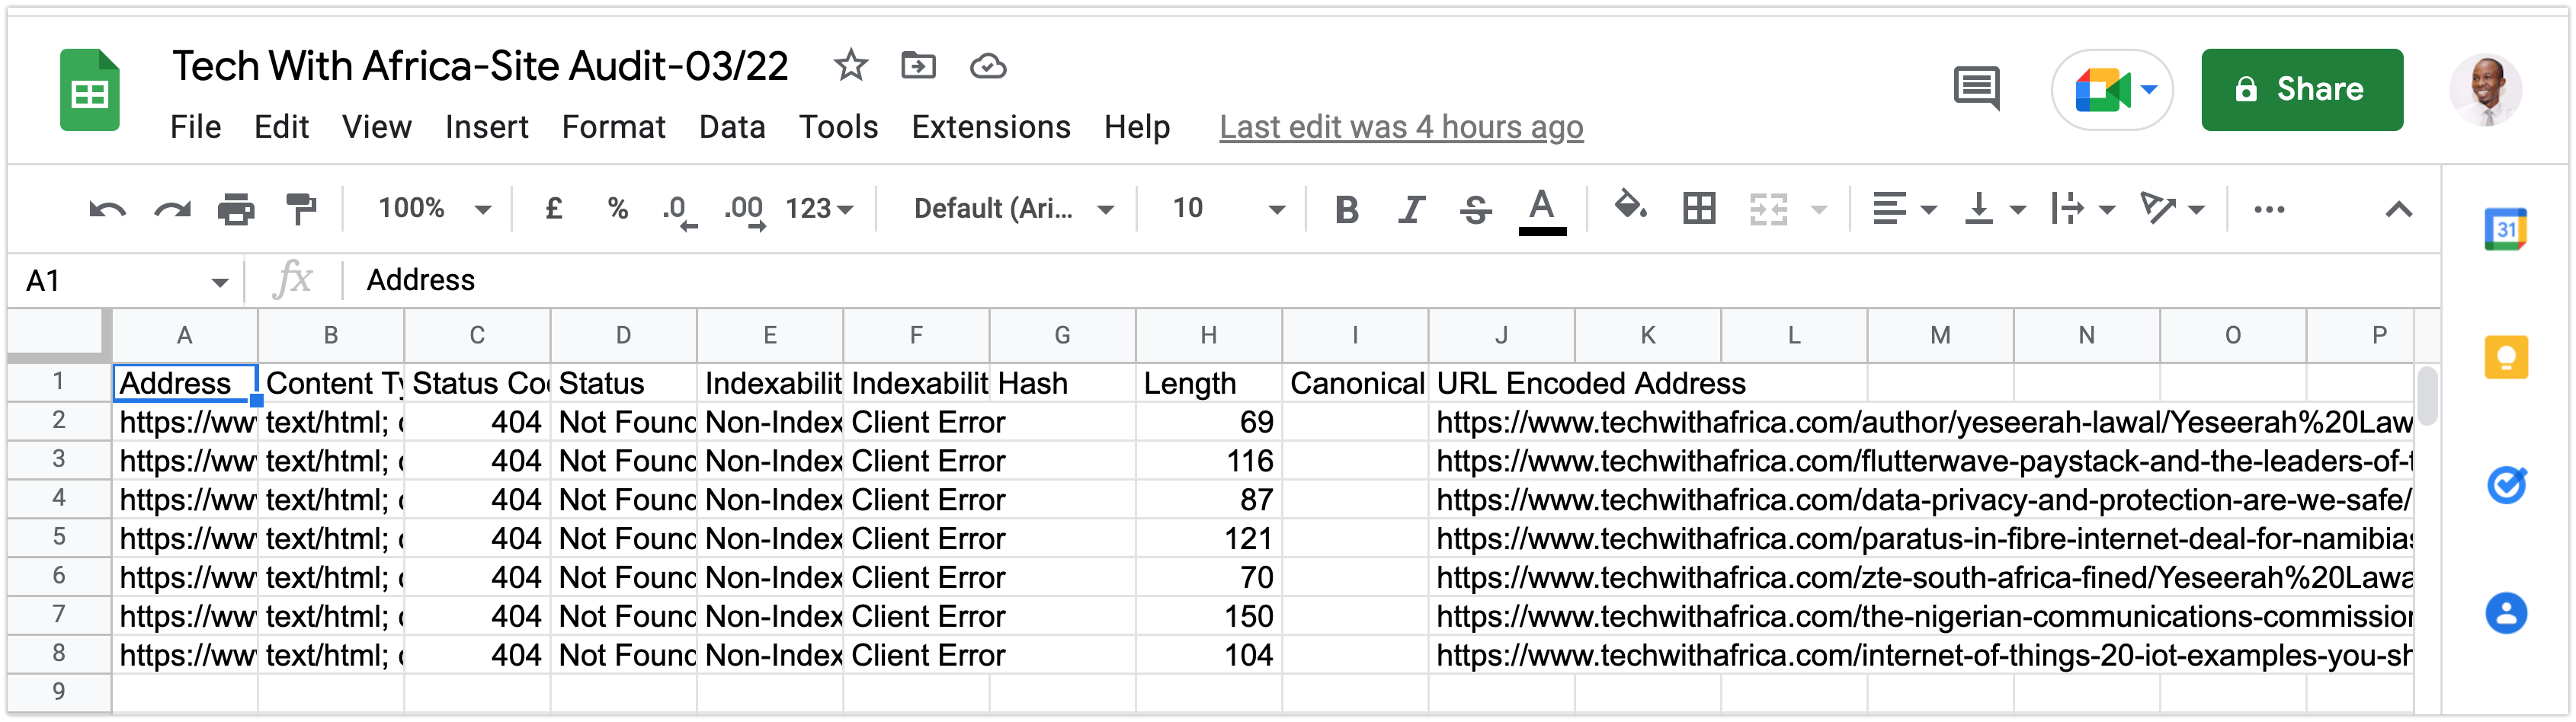 Tech With Africa Response Codes on Google Sheets